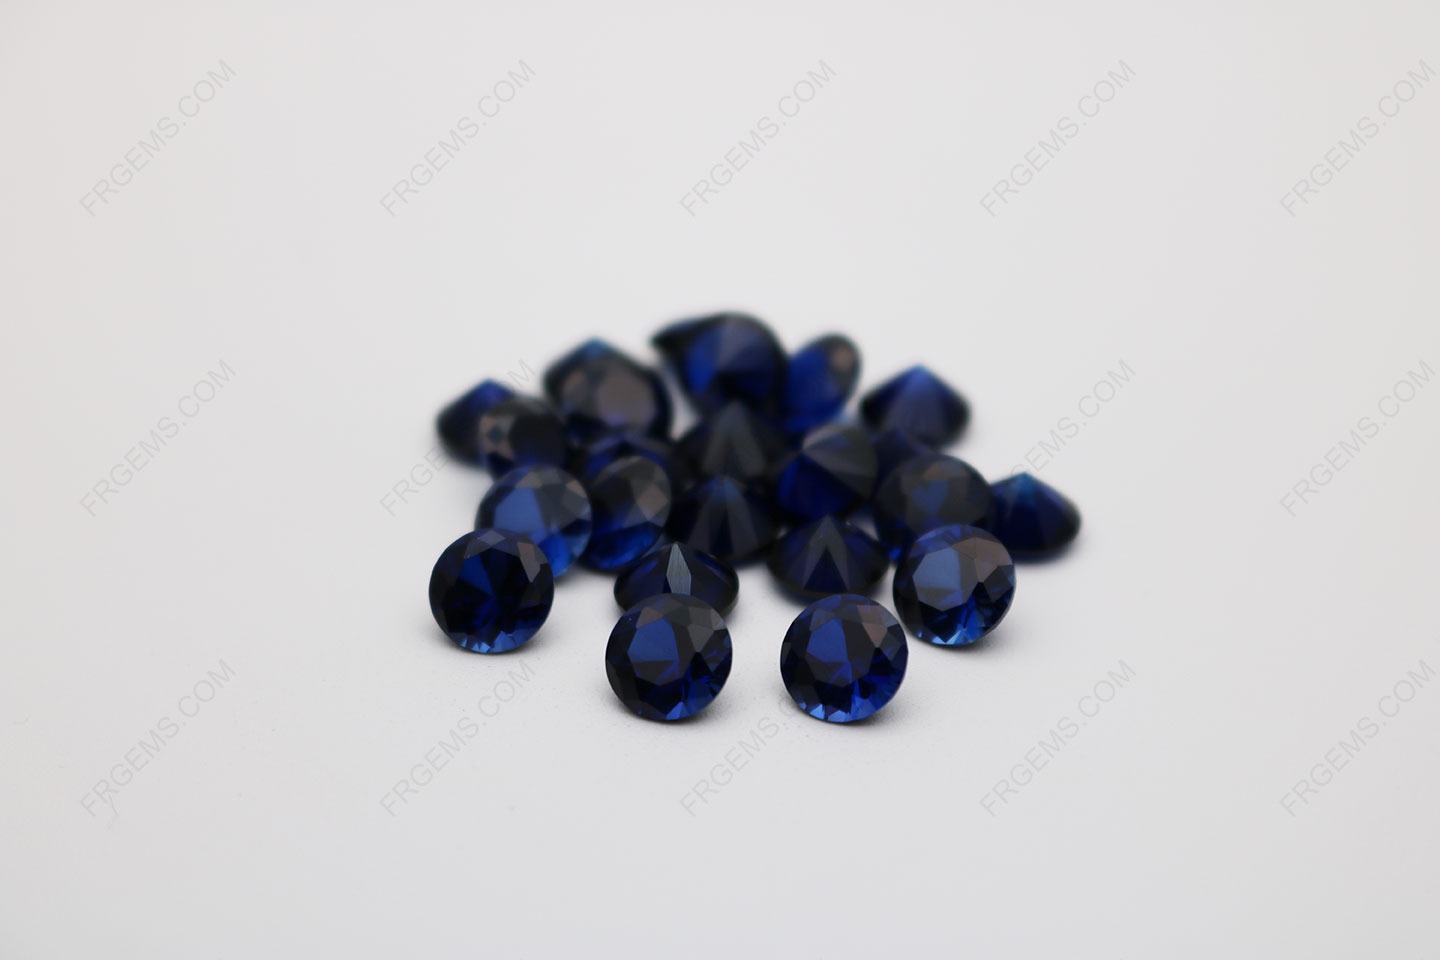 Loose Synthetic Lab Created Corundum Blue Sapphire 34# Round Shape Faceted Cut 6.50mm stones Suppliers and wholesale